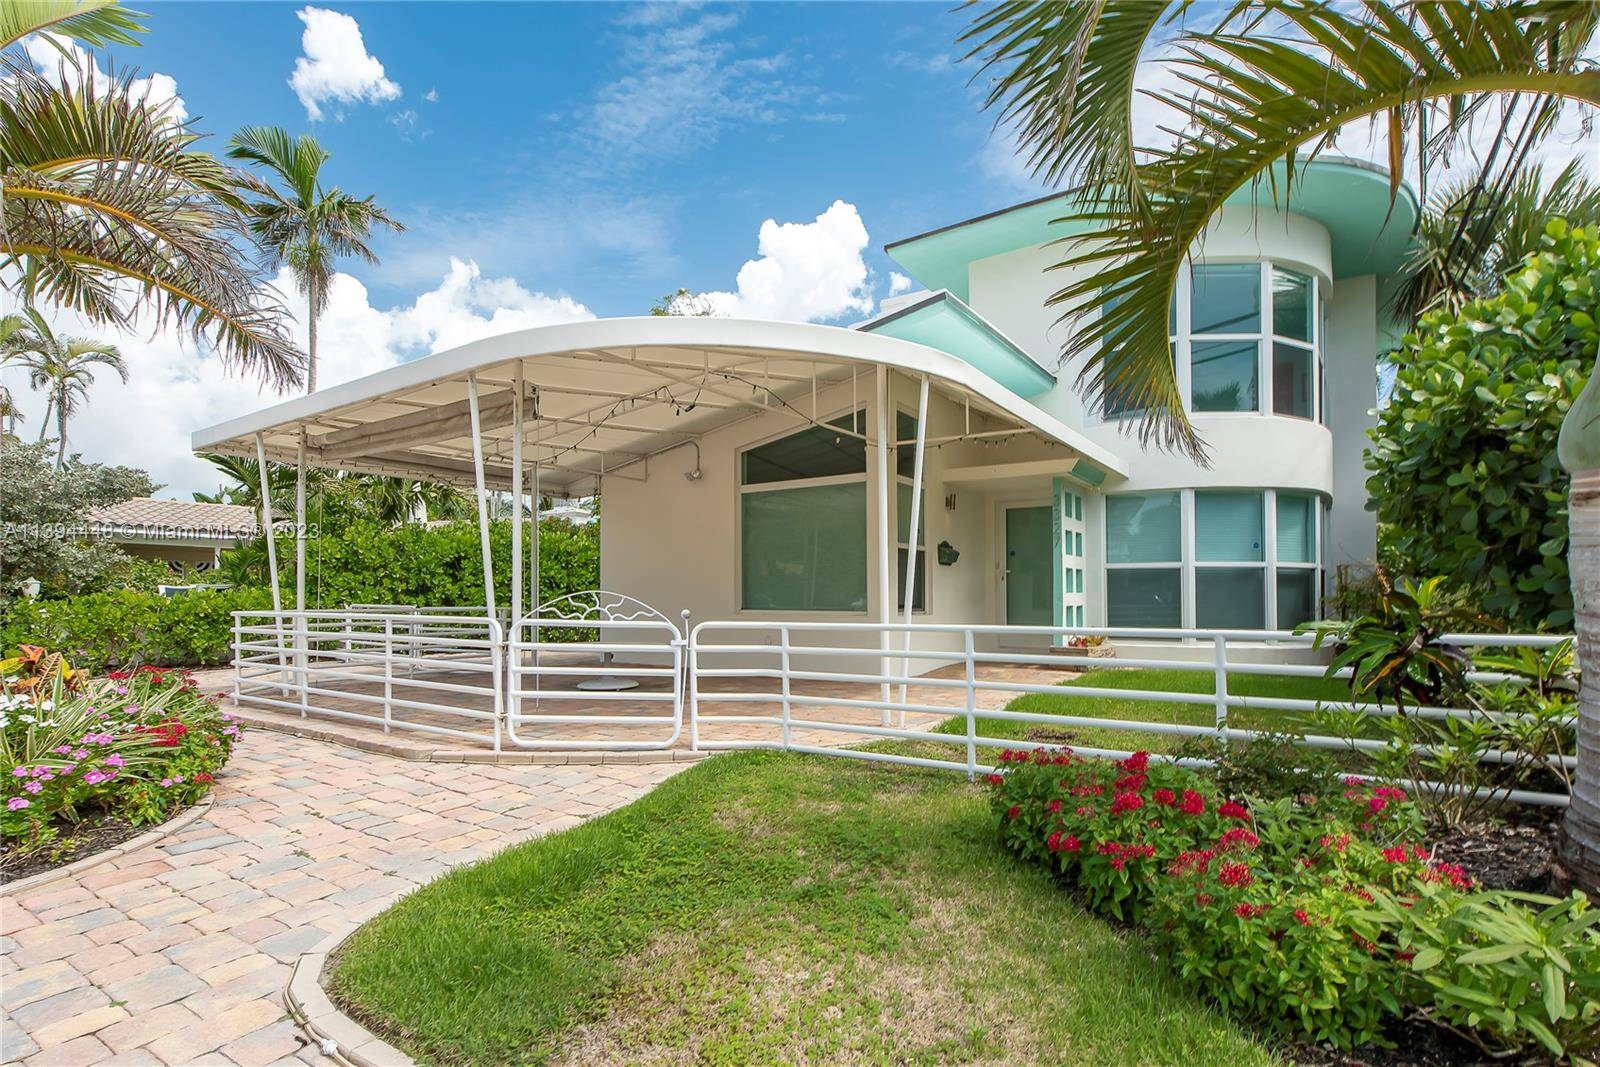 This furnished restored architectural gem is a tropical seaside paradise !